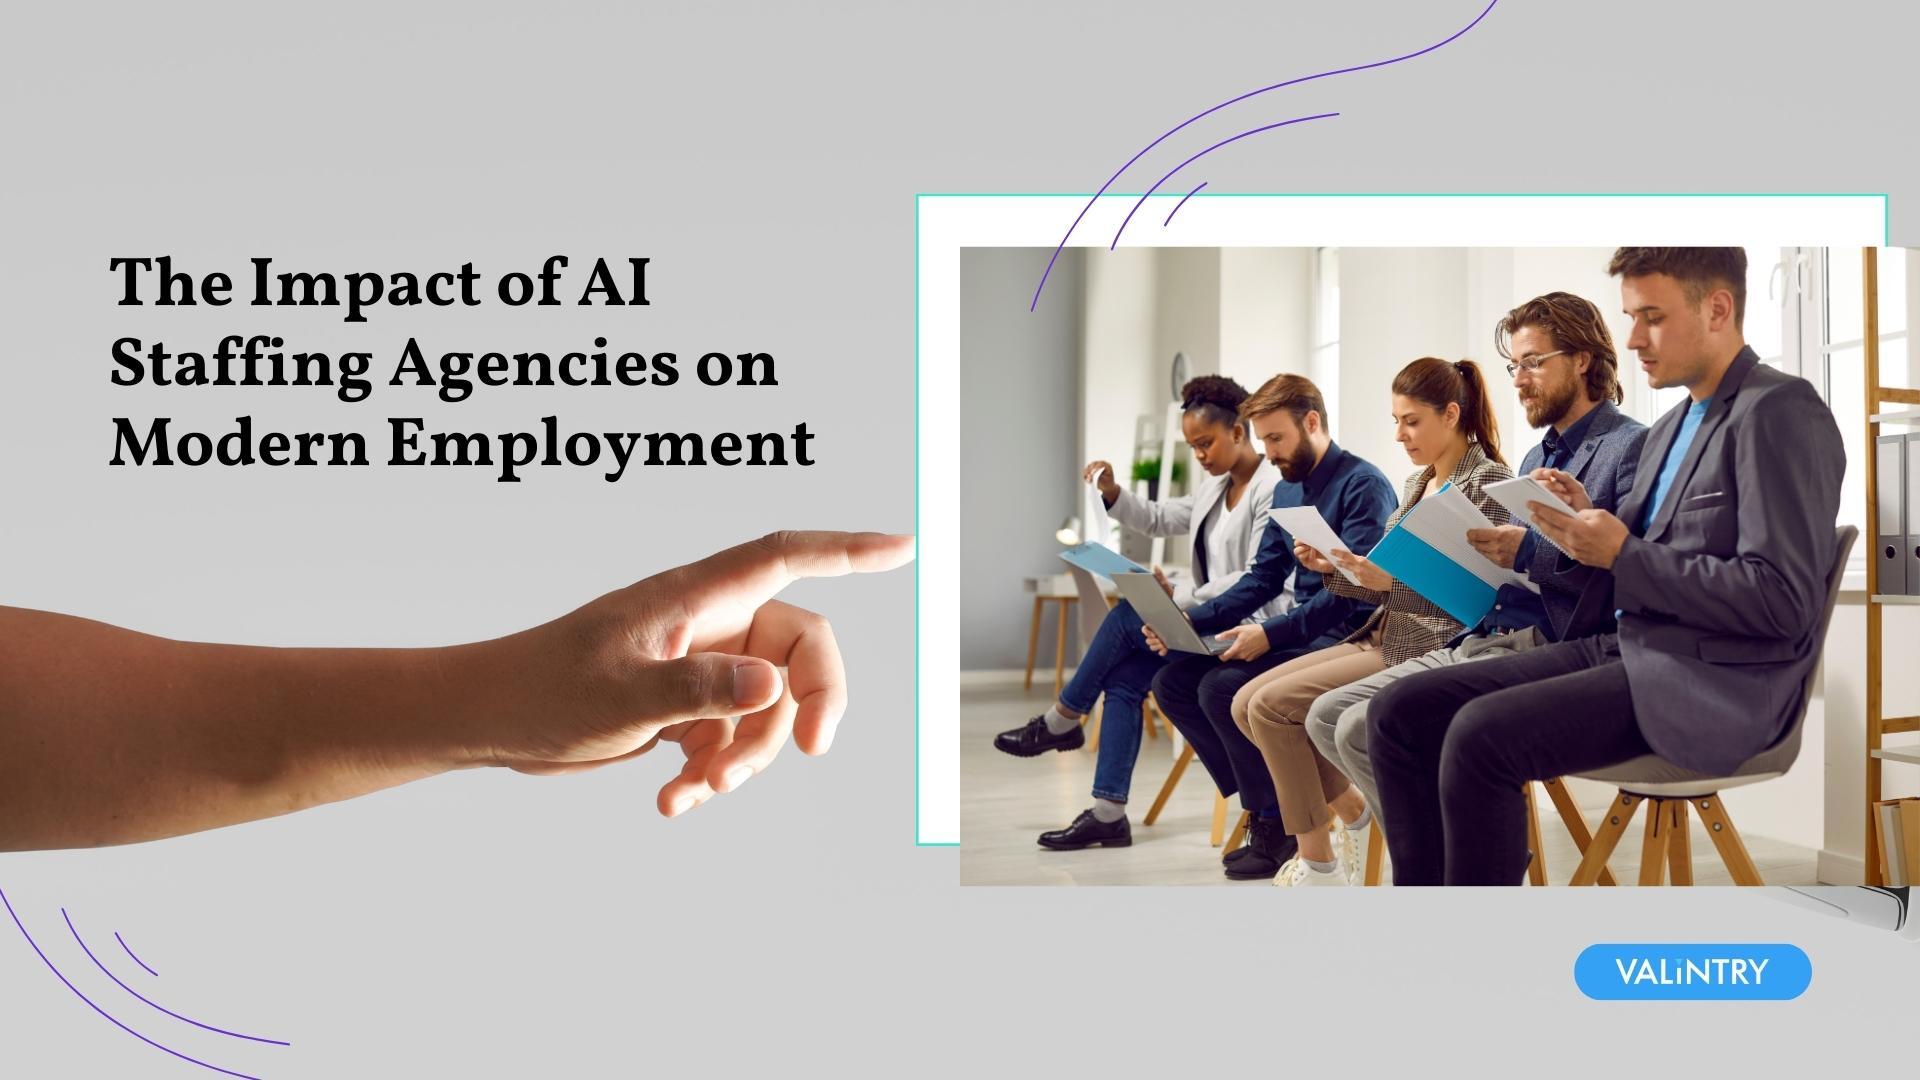 The Impact of AI Staffing Agencies on Modern Employment - VALiNTRY